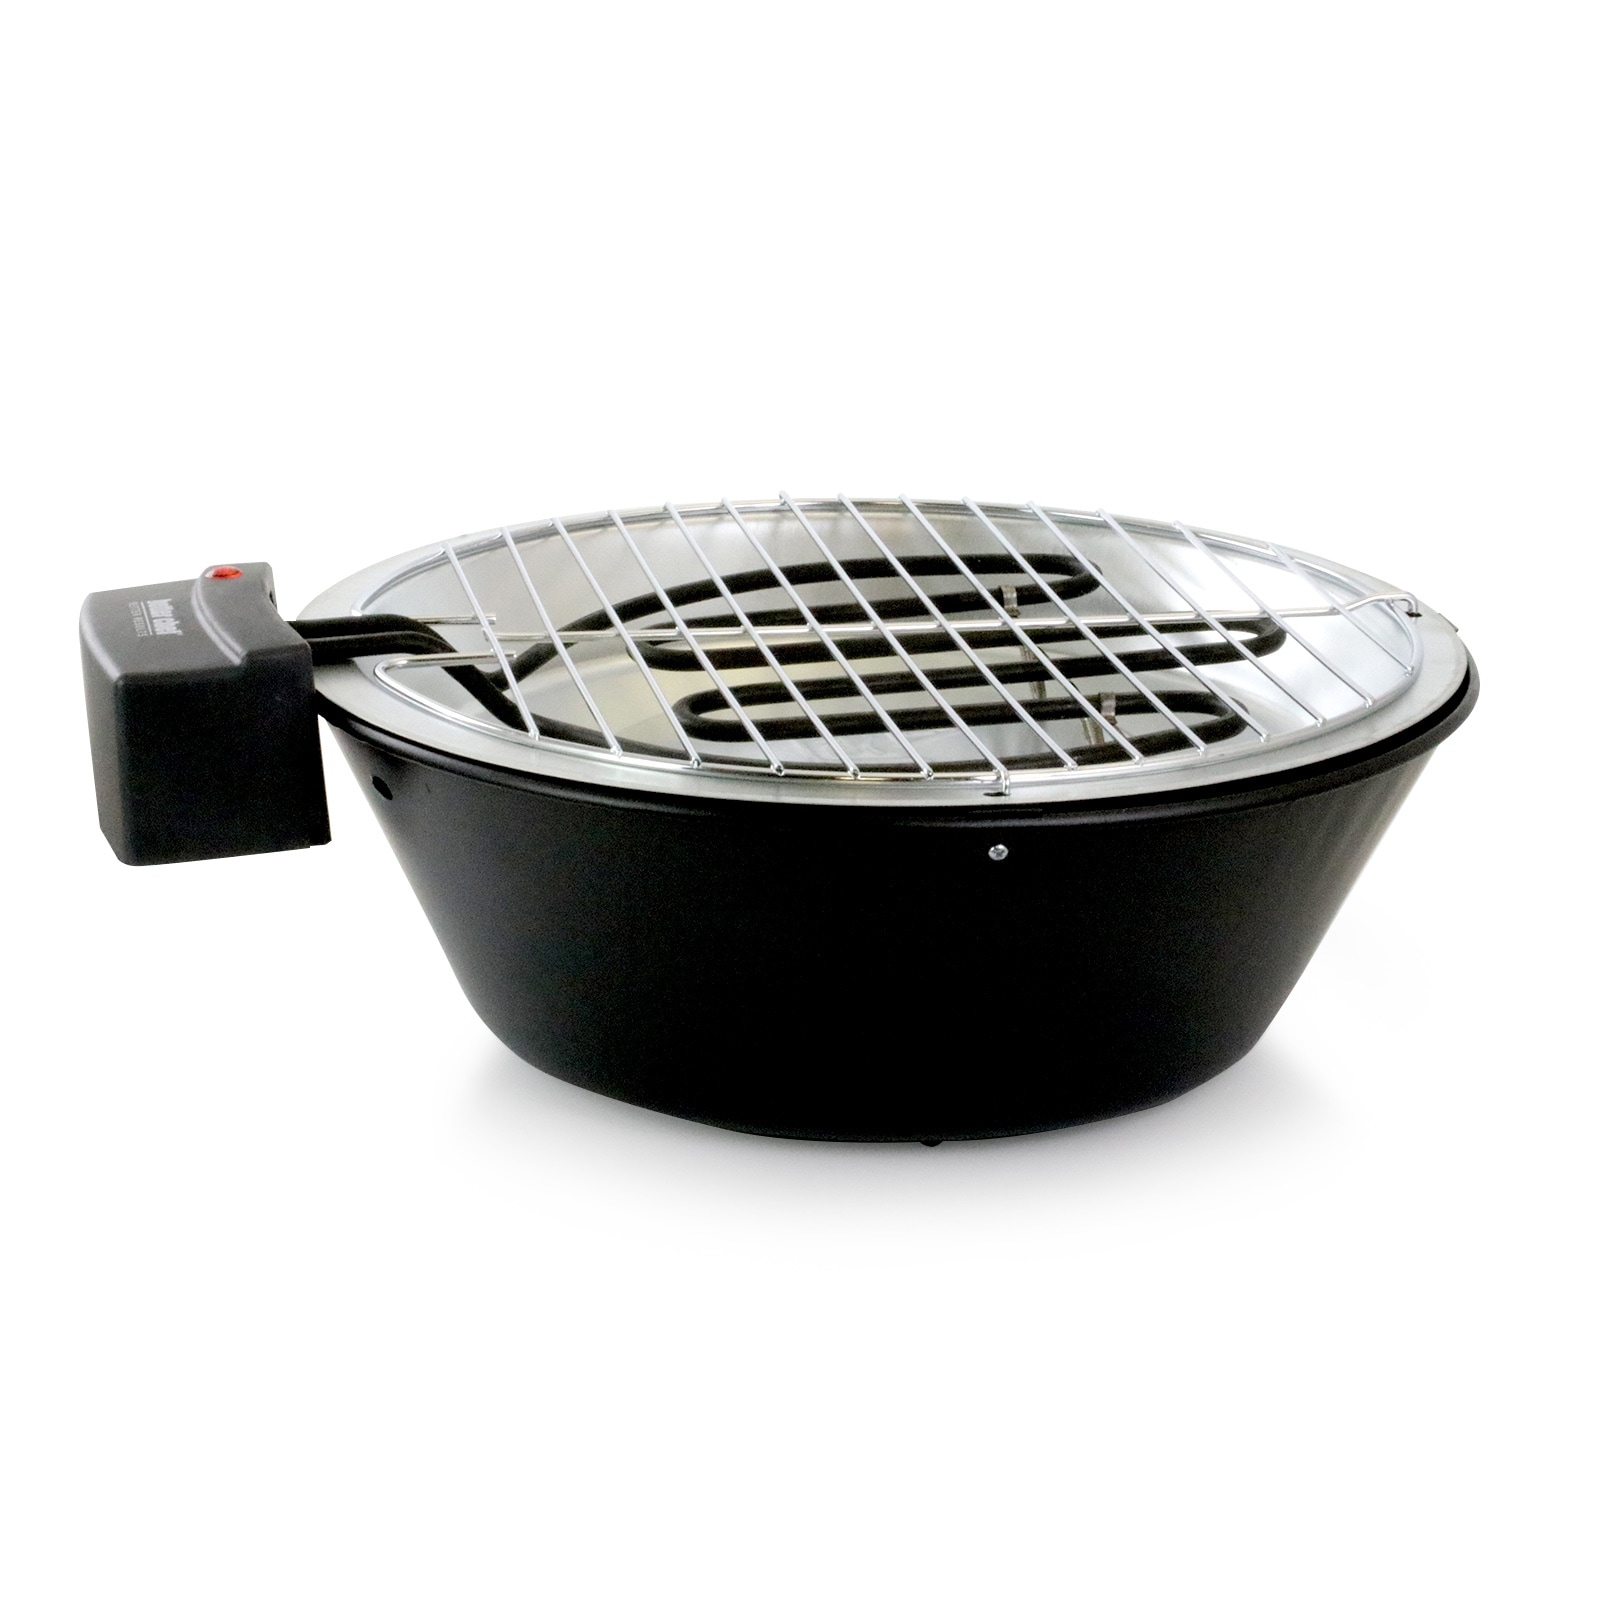 Better Chef Indoor Outdoor 14 in Tabletop Electric Barbecue Grill - On Sale  - Bed Bath & Beyond - 32175719